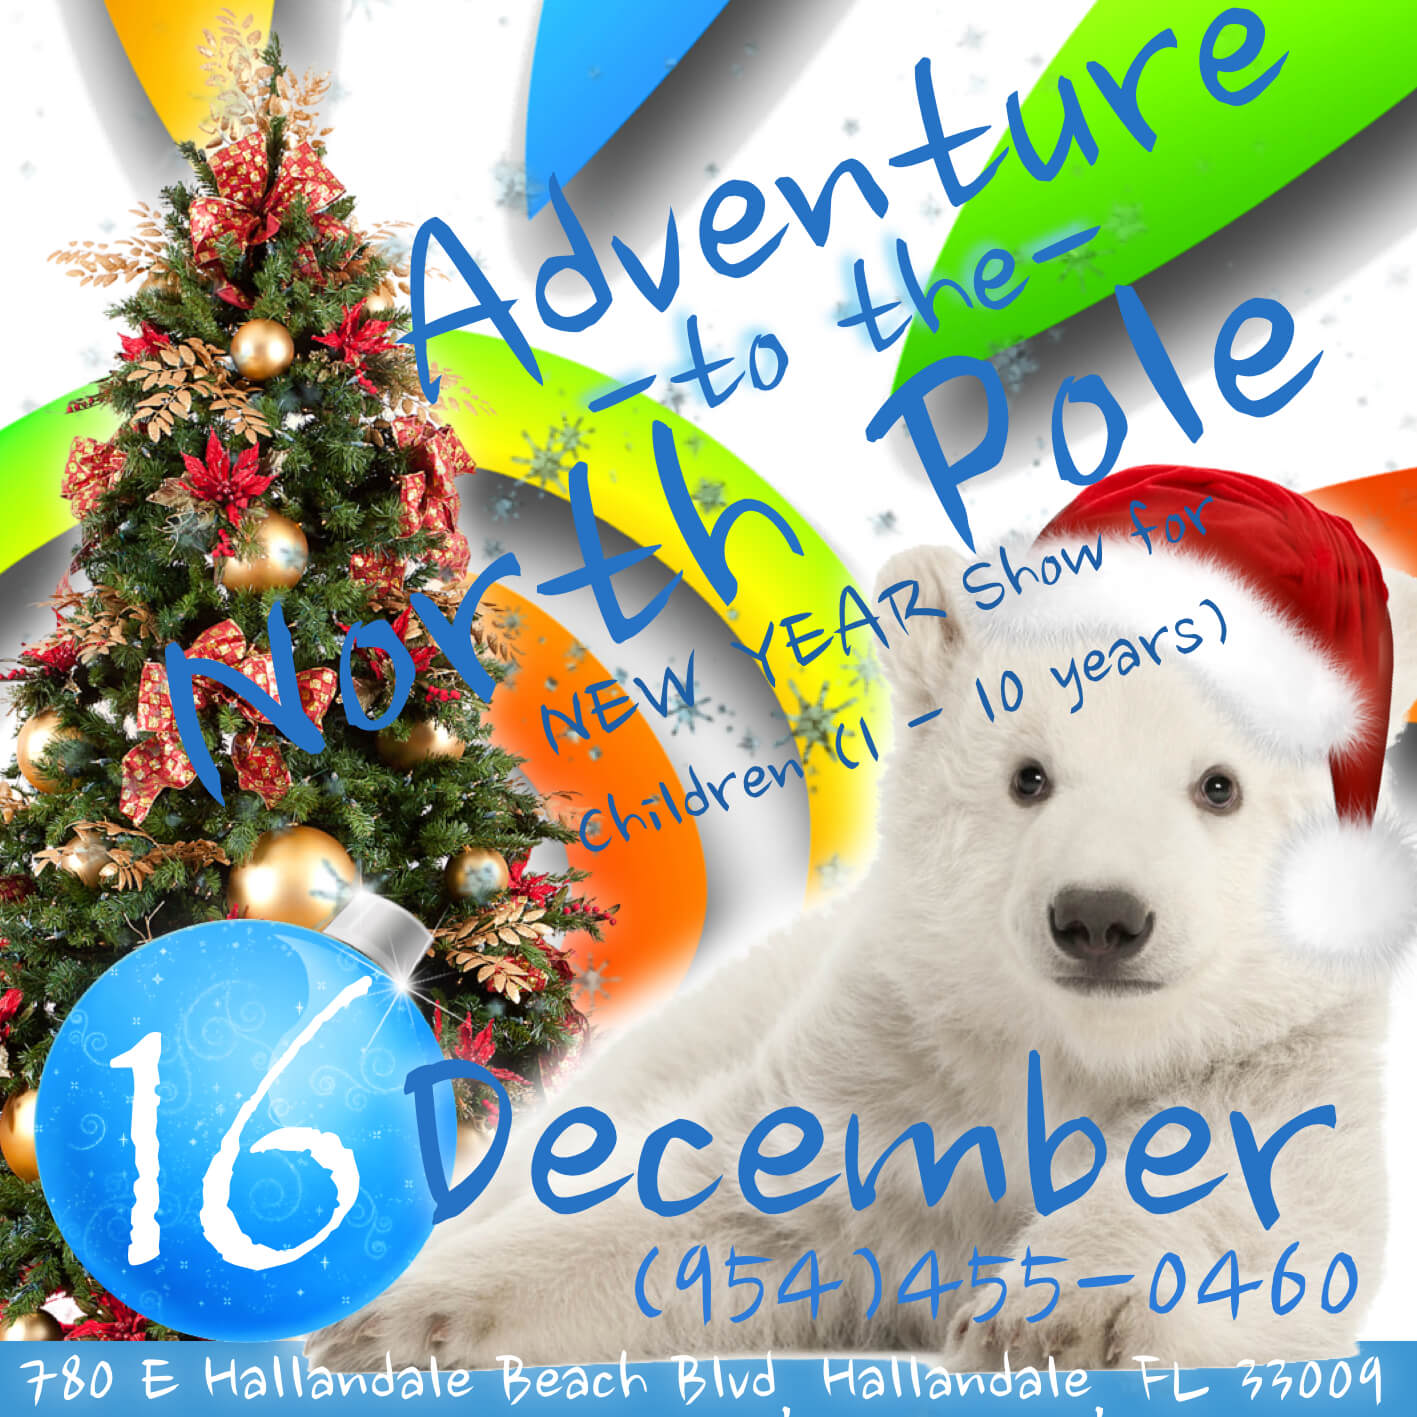 NEW YEAR SHOW for children 1-10 years!